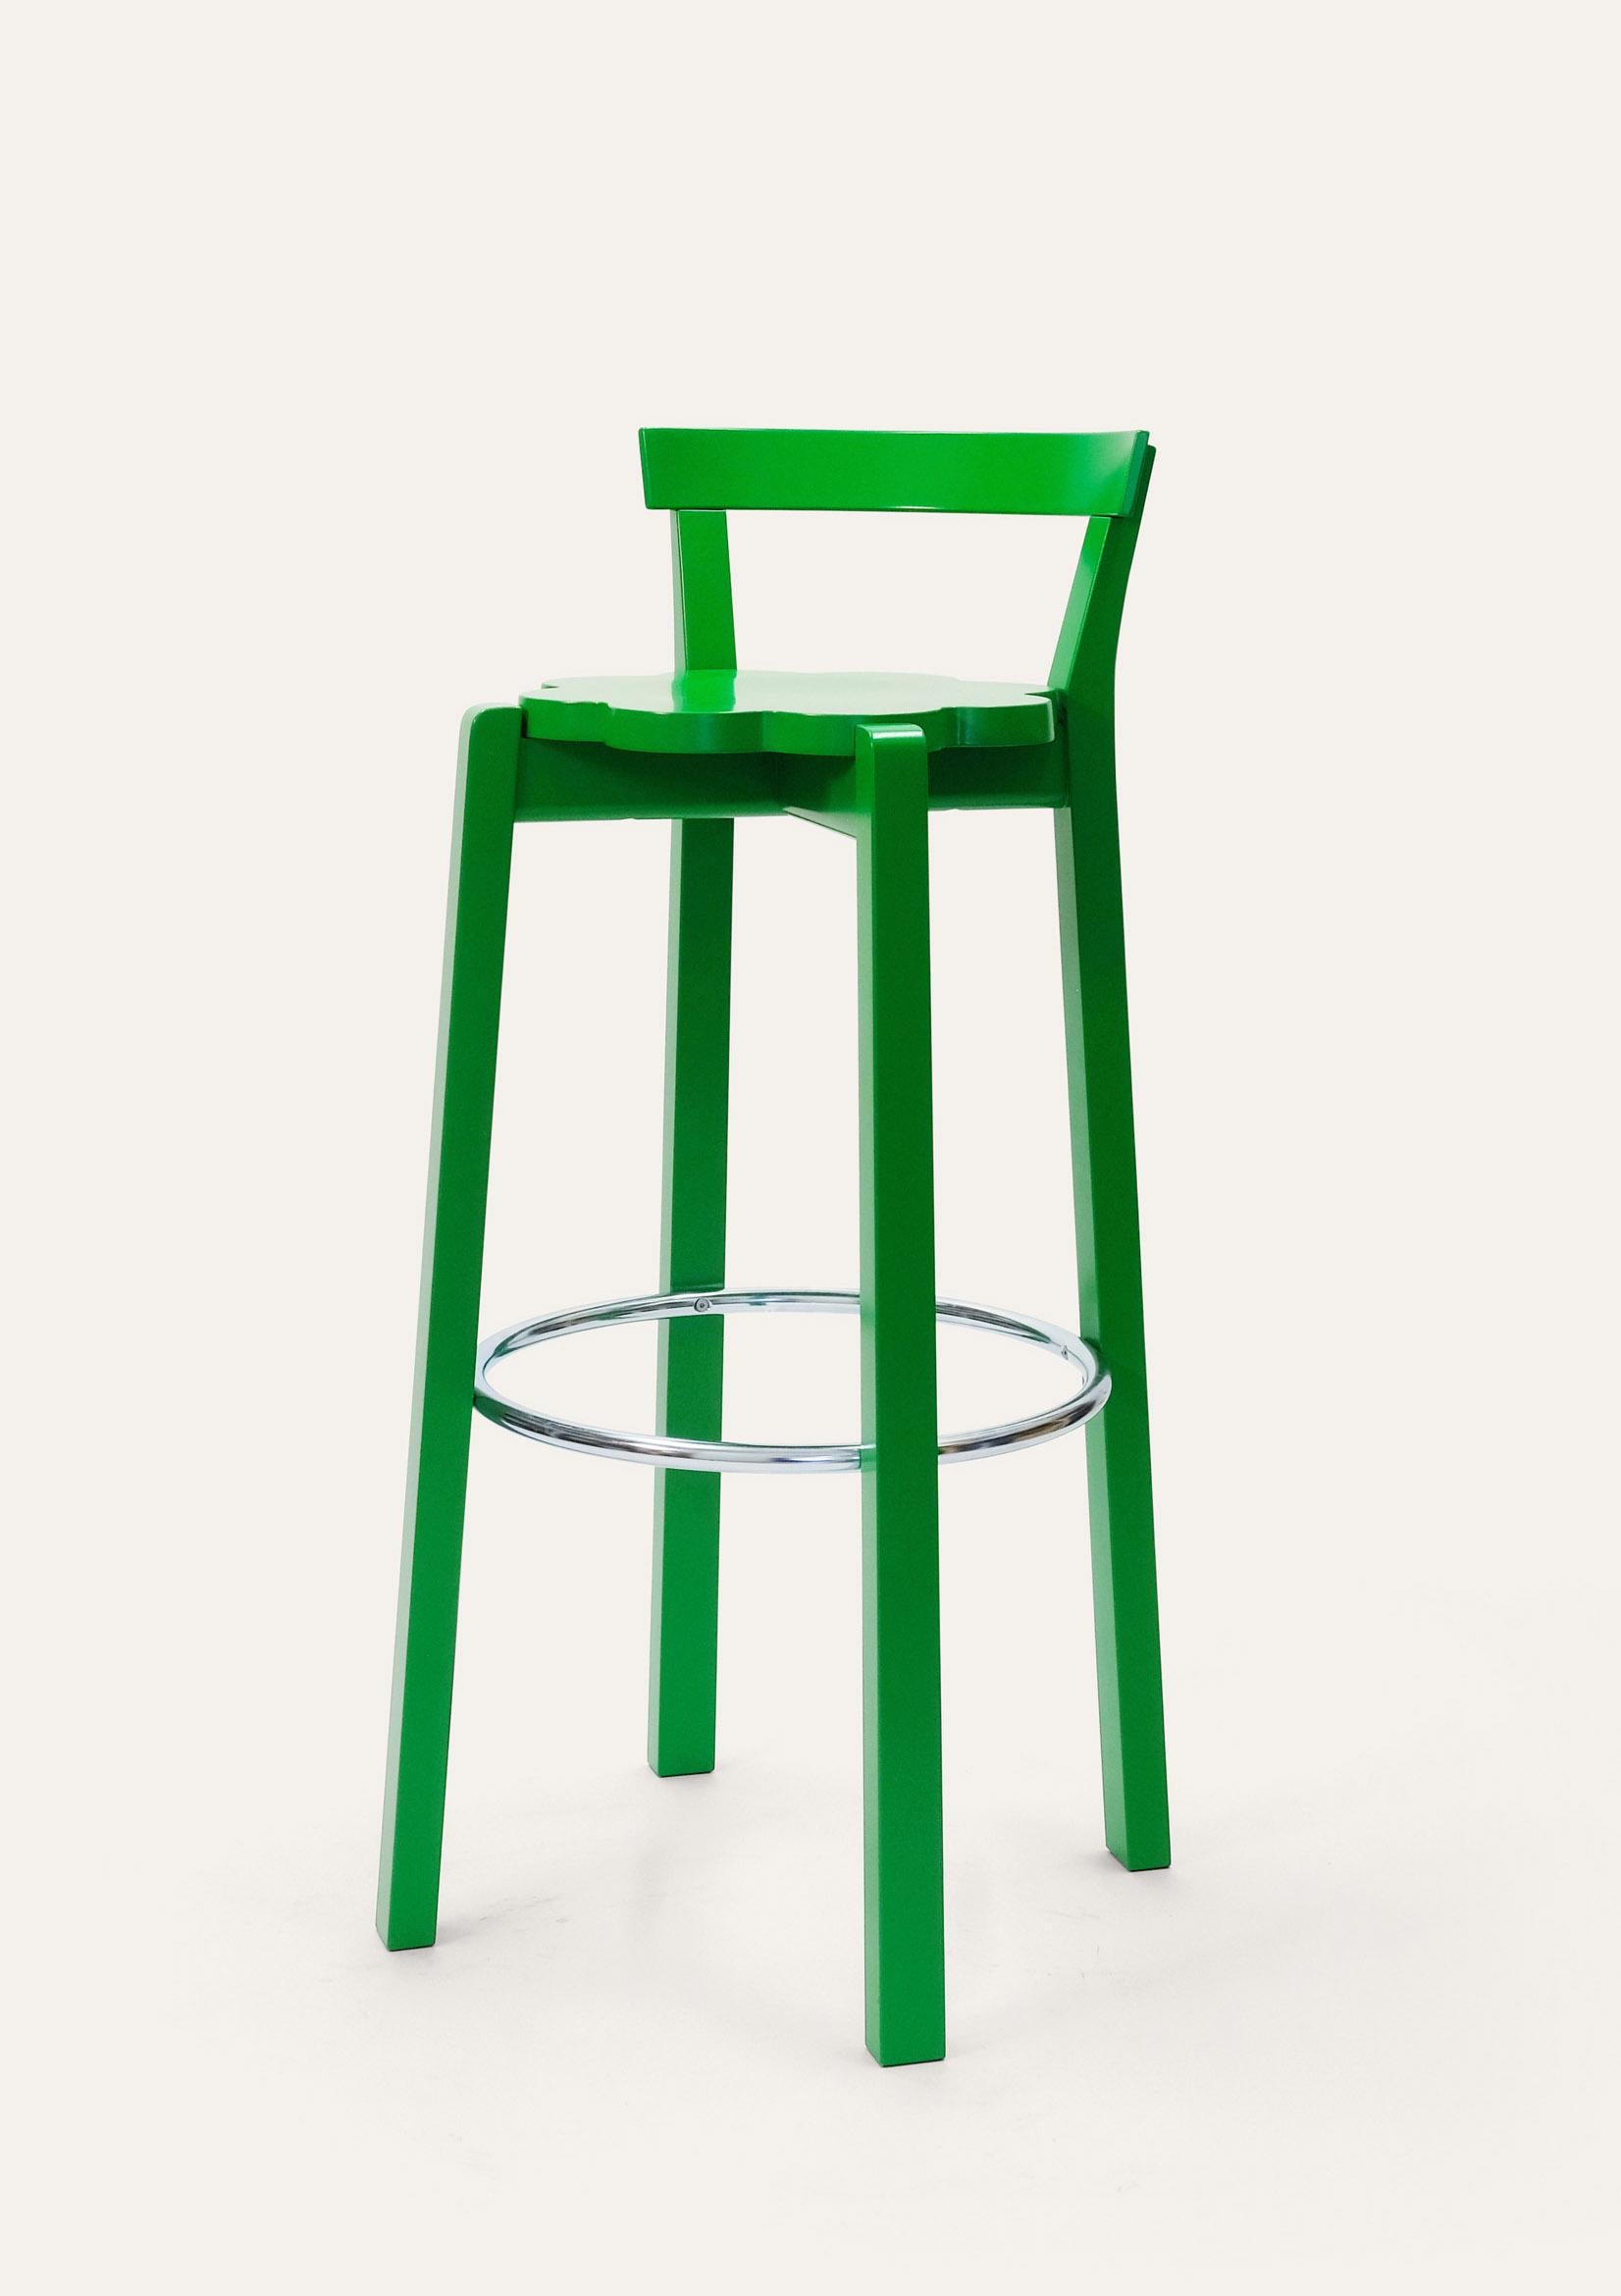 Large Green Blossom bar chair by Storängen Design
Dimensions: D 45 x W 44 x H 99 x SH 82 cm
Materials: birch wood, steel.
Available in other colors and sizes. With or without backrest.

A small and neat stackable chair, which works well round